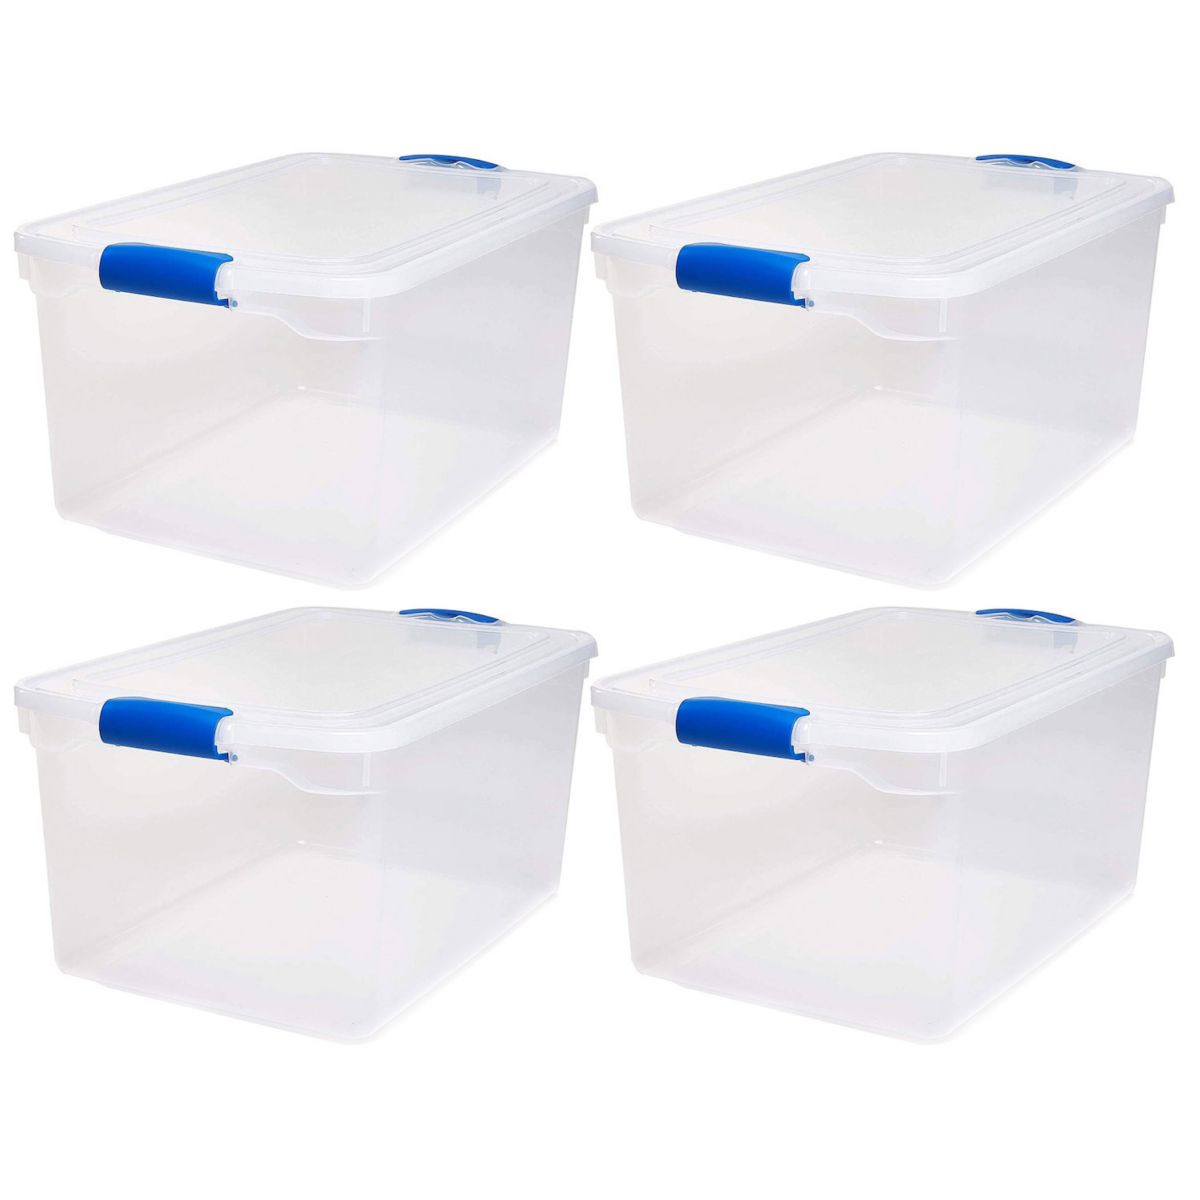 Homz 66 Quart Heavy Duty Modular Stackable Storage Containers, Clear, 2 Pack (2 Pack) Homz